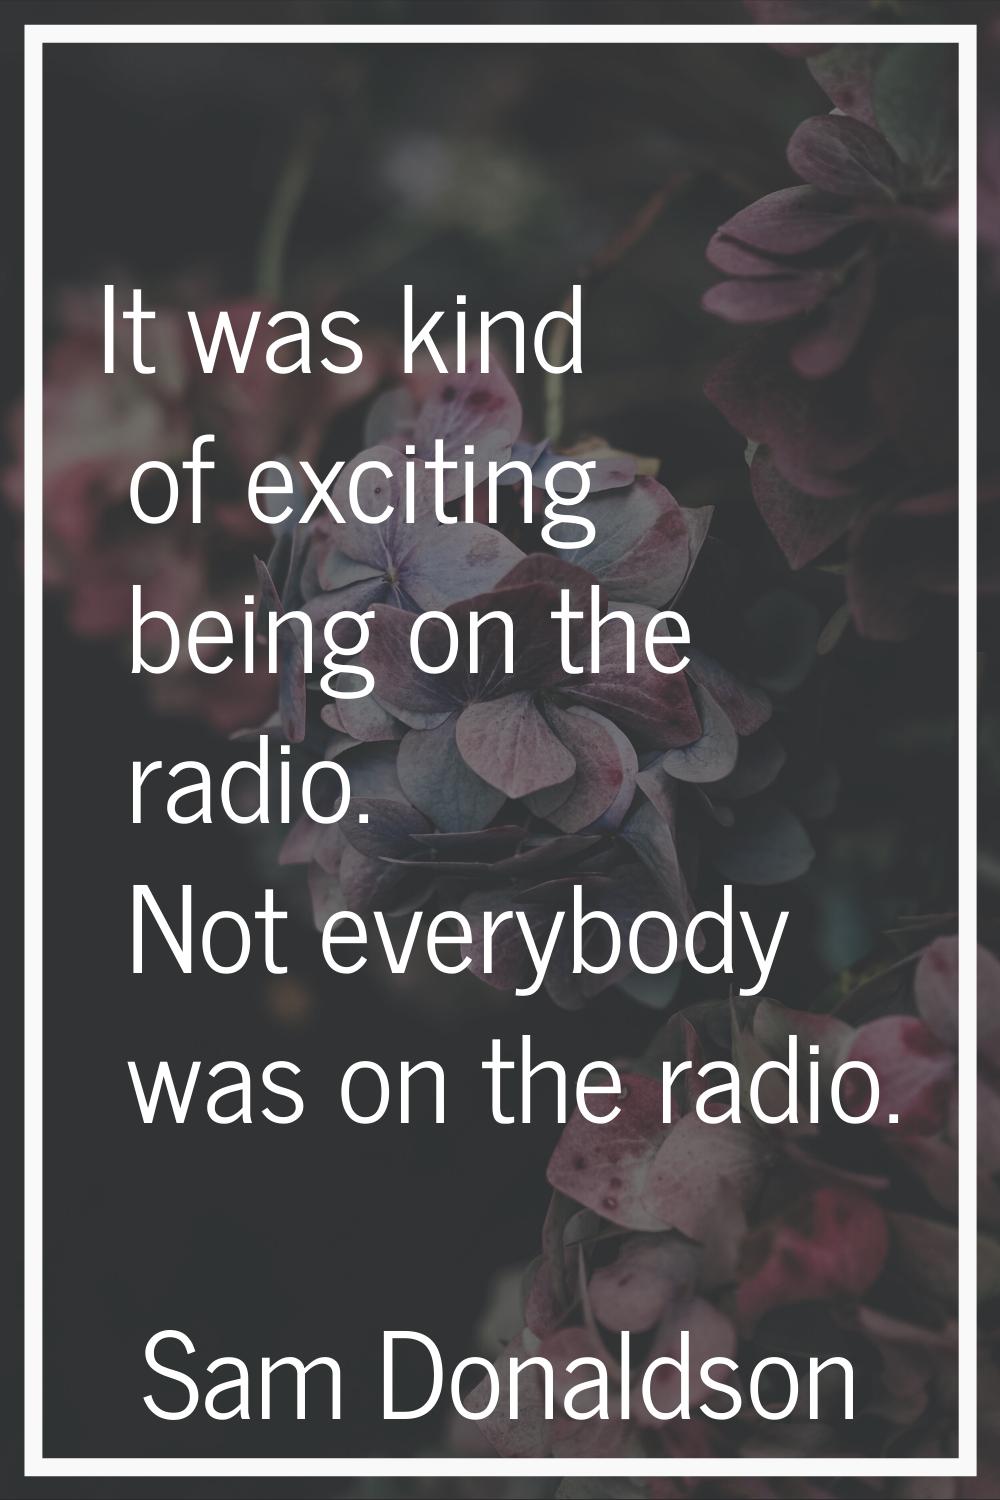 It was kind of exciting being on the radio. Not everybody was on the radio.